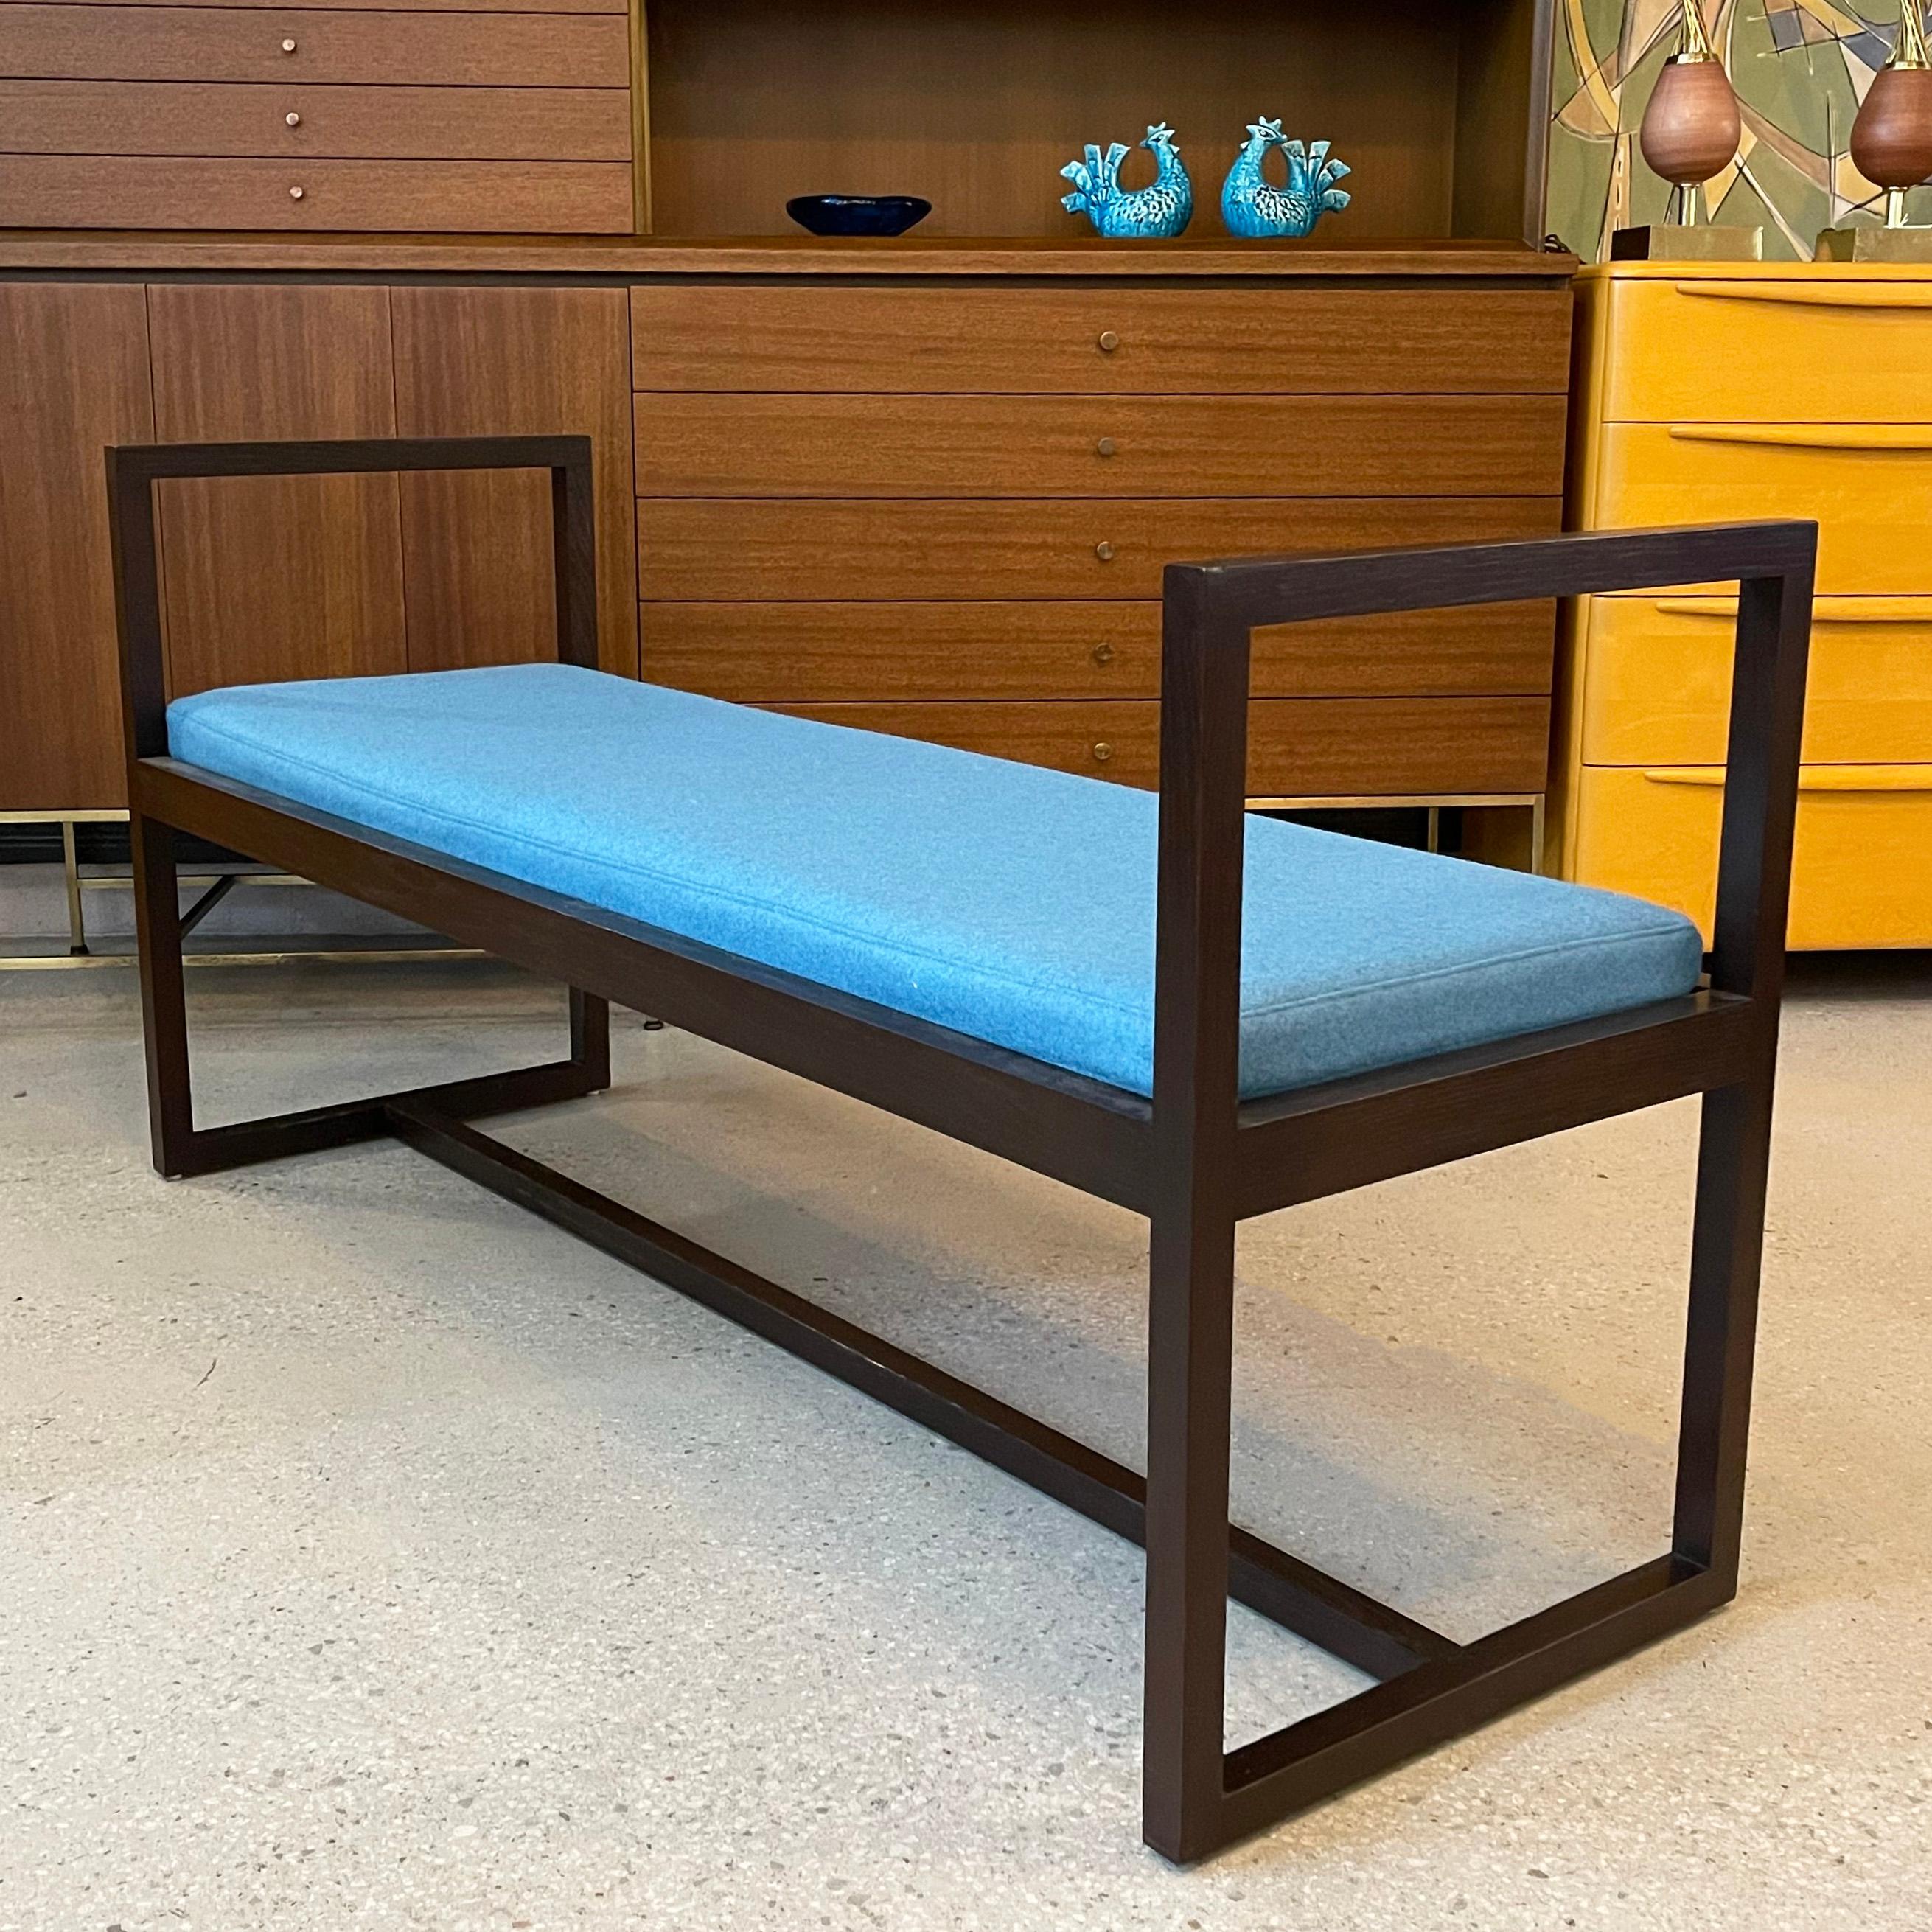 Mid-century modern bench features a clean, geometric, lacquered mahogany frame with high handled sides and contrasting bright blue wool upholstered seat. It's perfect as accent seating or entryway bench.